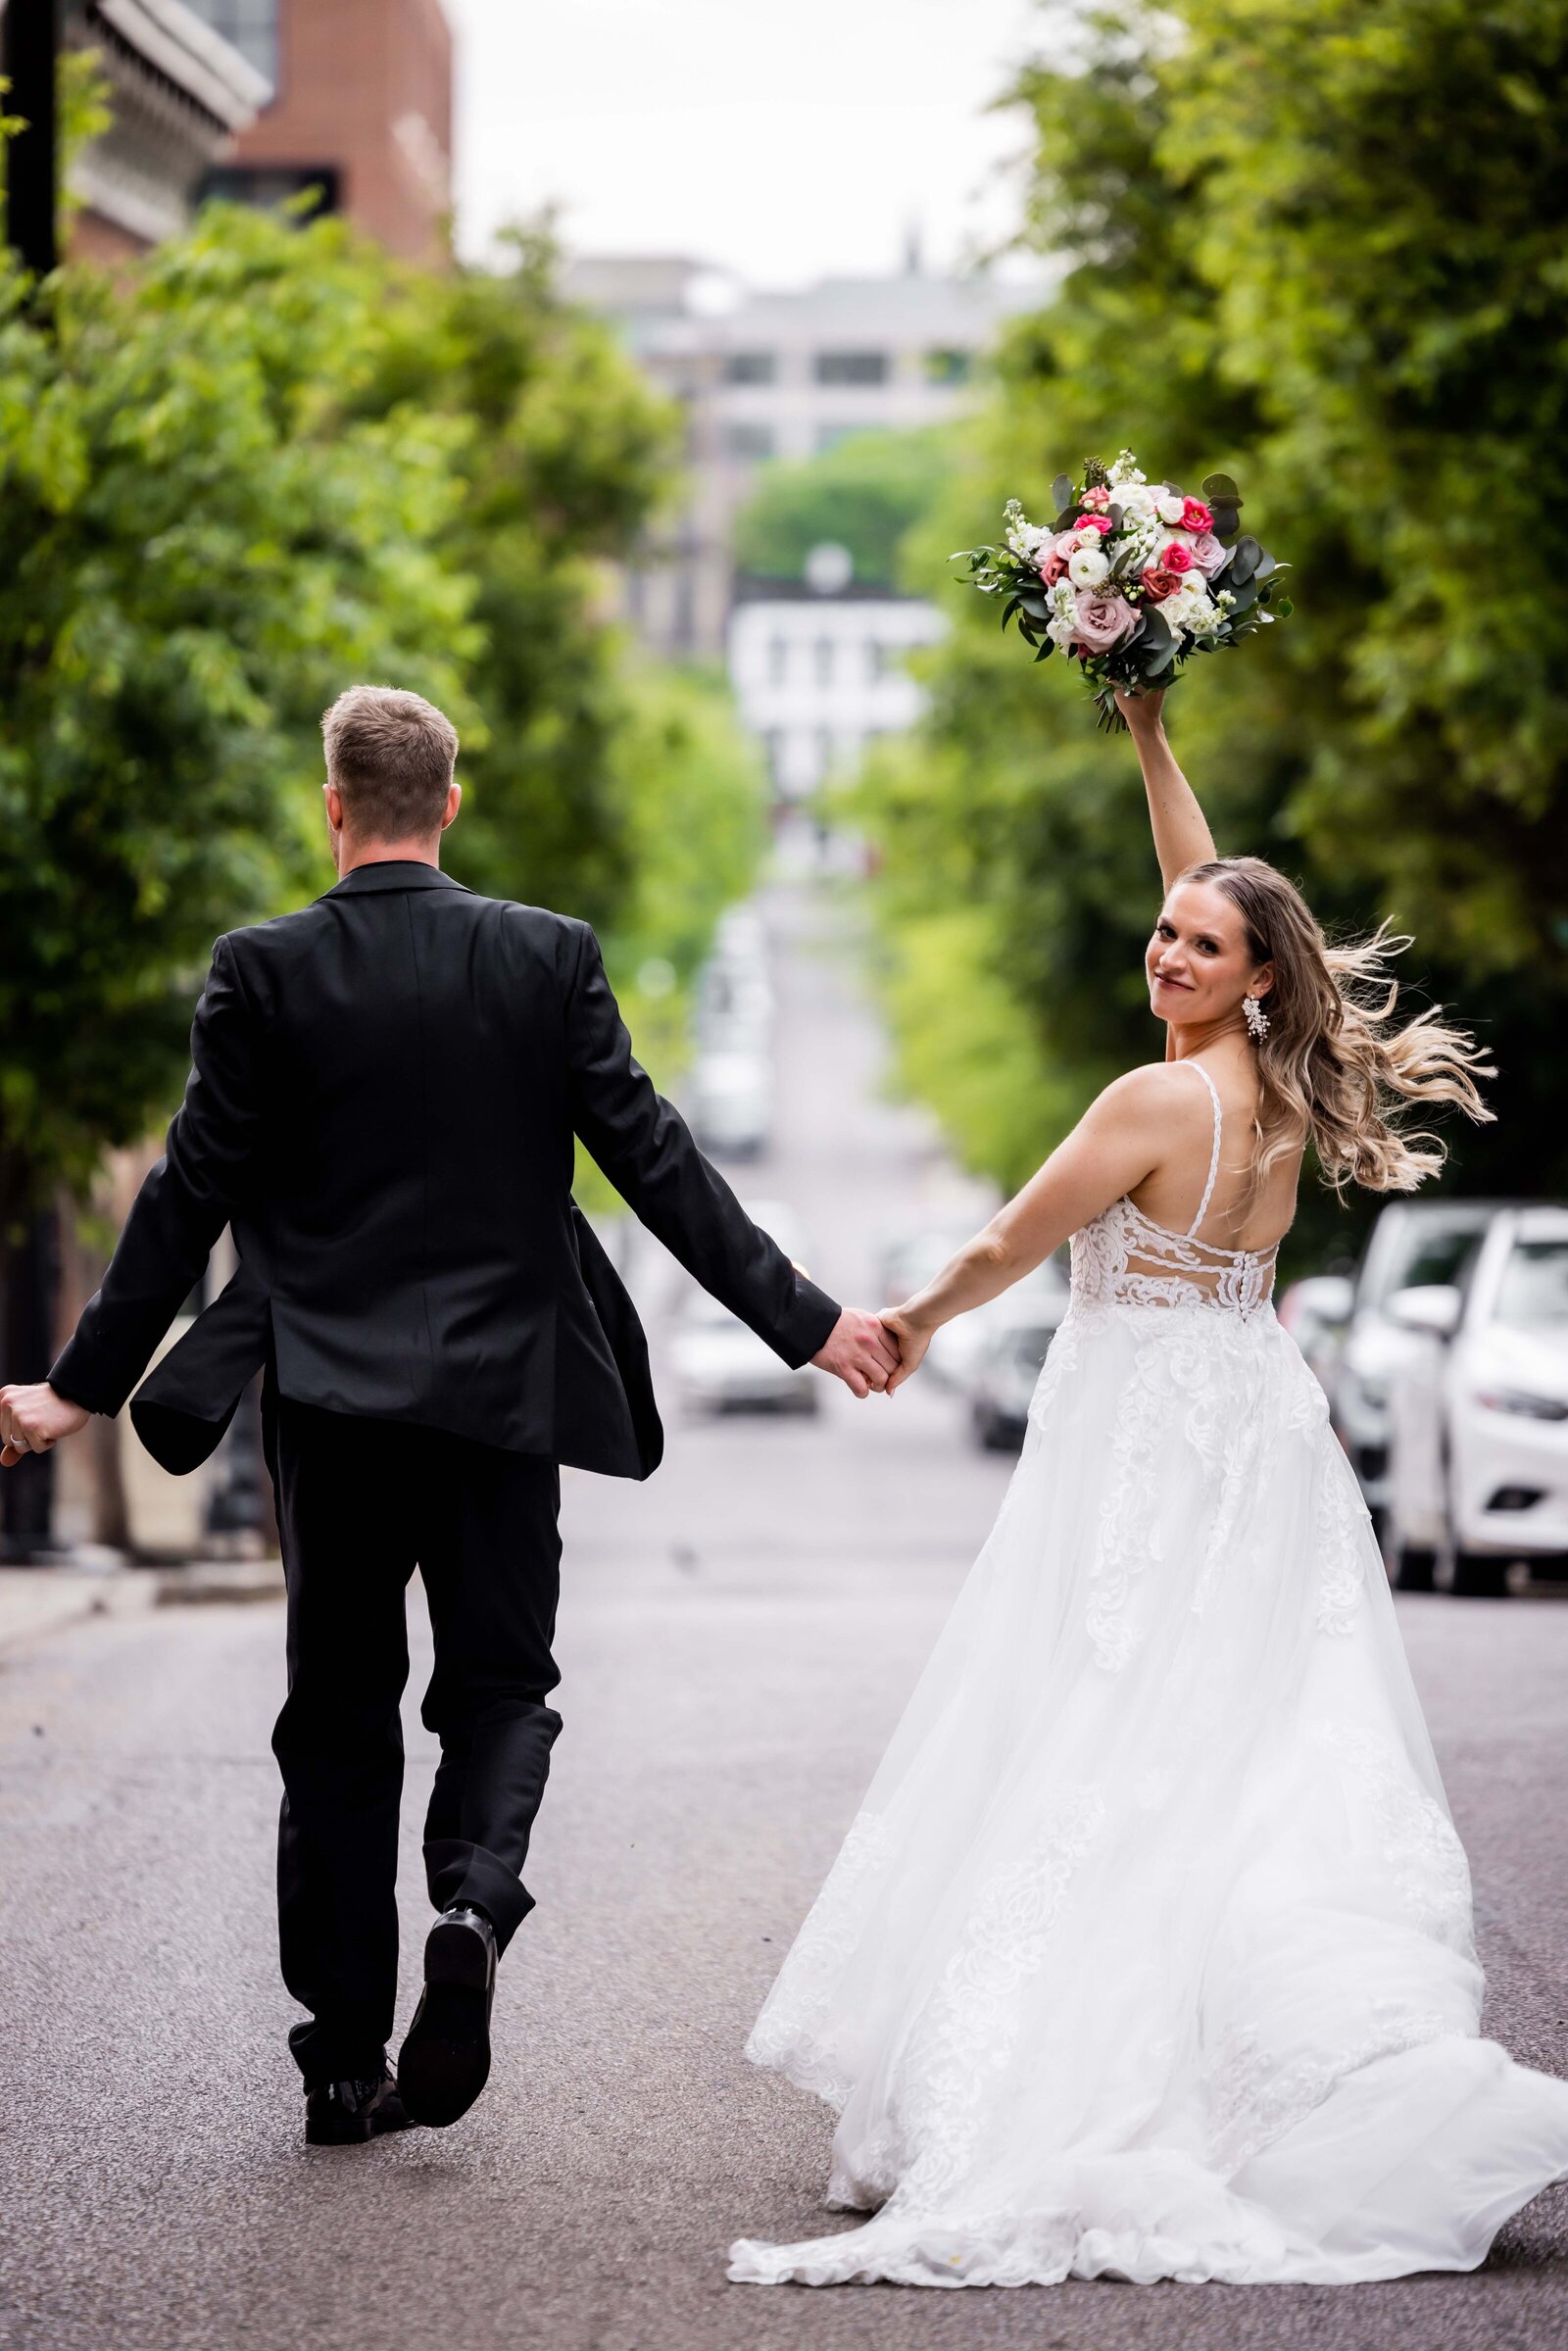 Capture the joyous moment with Sandy and Jack as they take their first walk as a married couple, blissfully strolling through the streets. This stunning photograph embodies the happiness and love of their special day, offering a glimpse into their magical wedding journey. Perfect for couples seeking inspiration for capturing their own memorable moments.